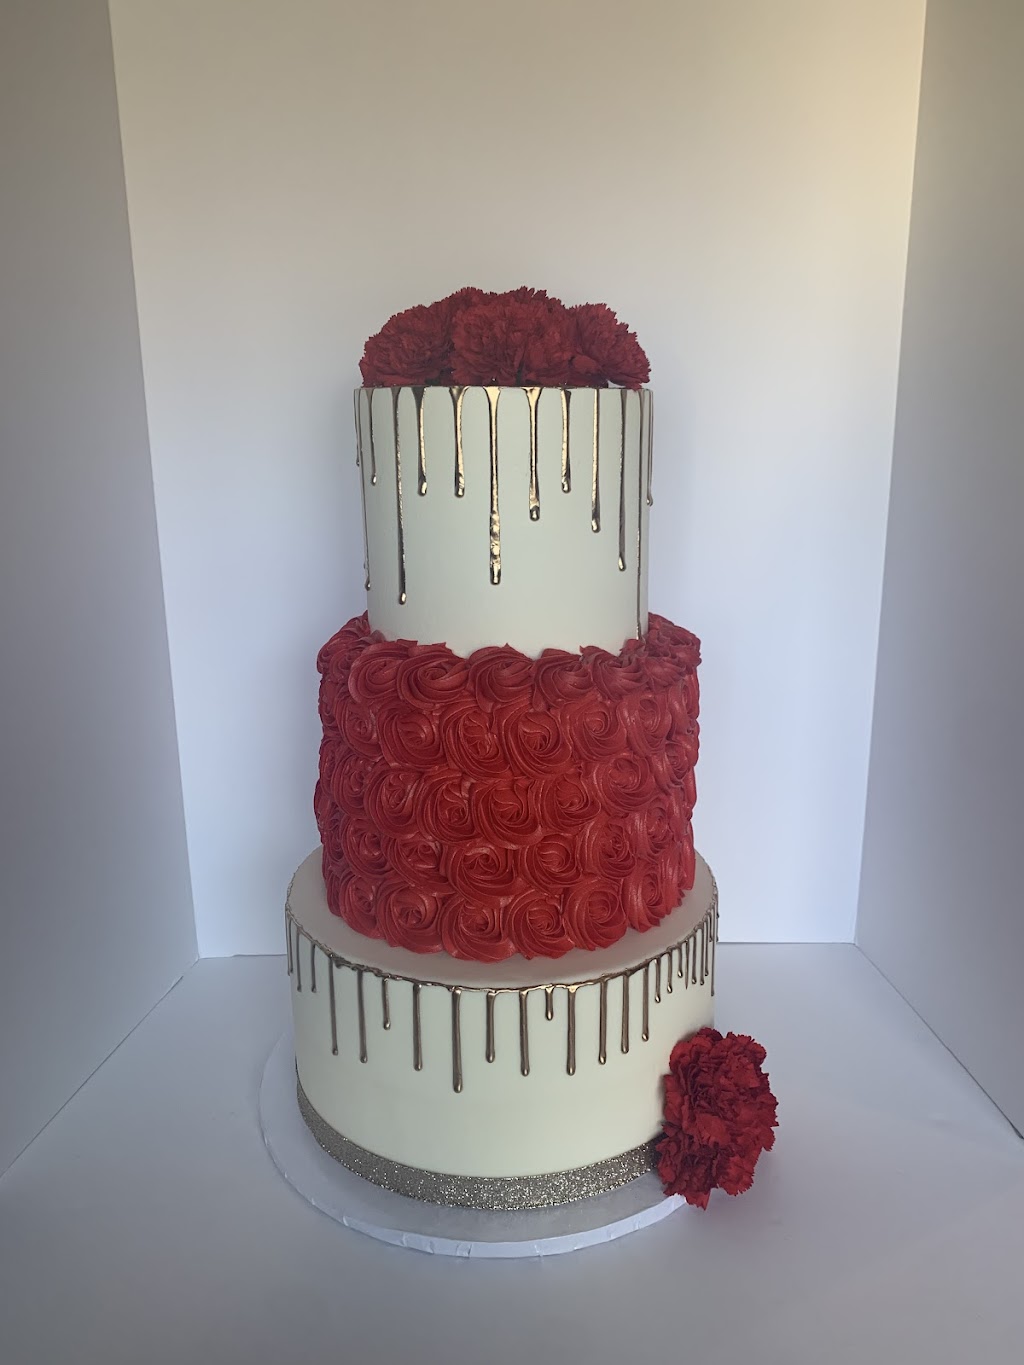 Cakes, Confections & More | 167 Rathbun Ave, Staten Island, NY 10312 | Phone: (718) 304-6295